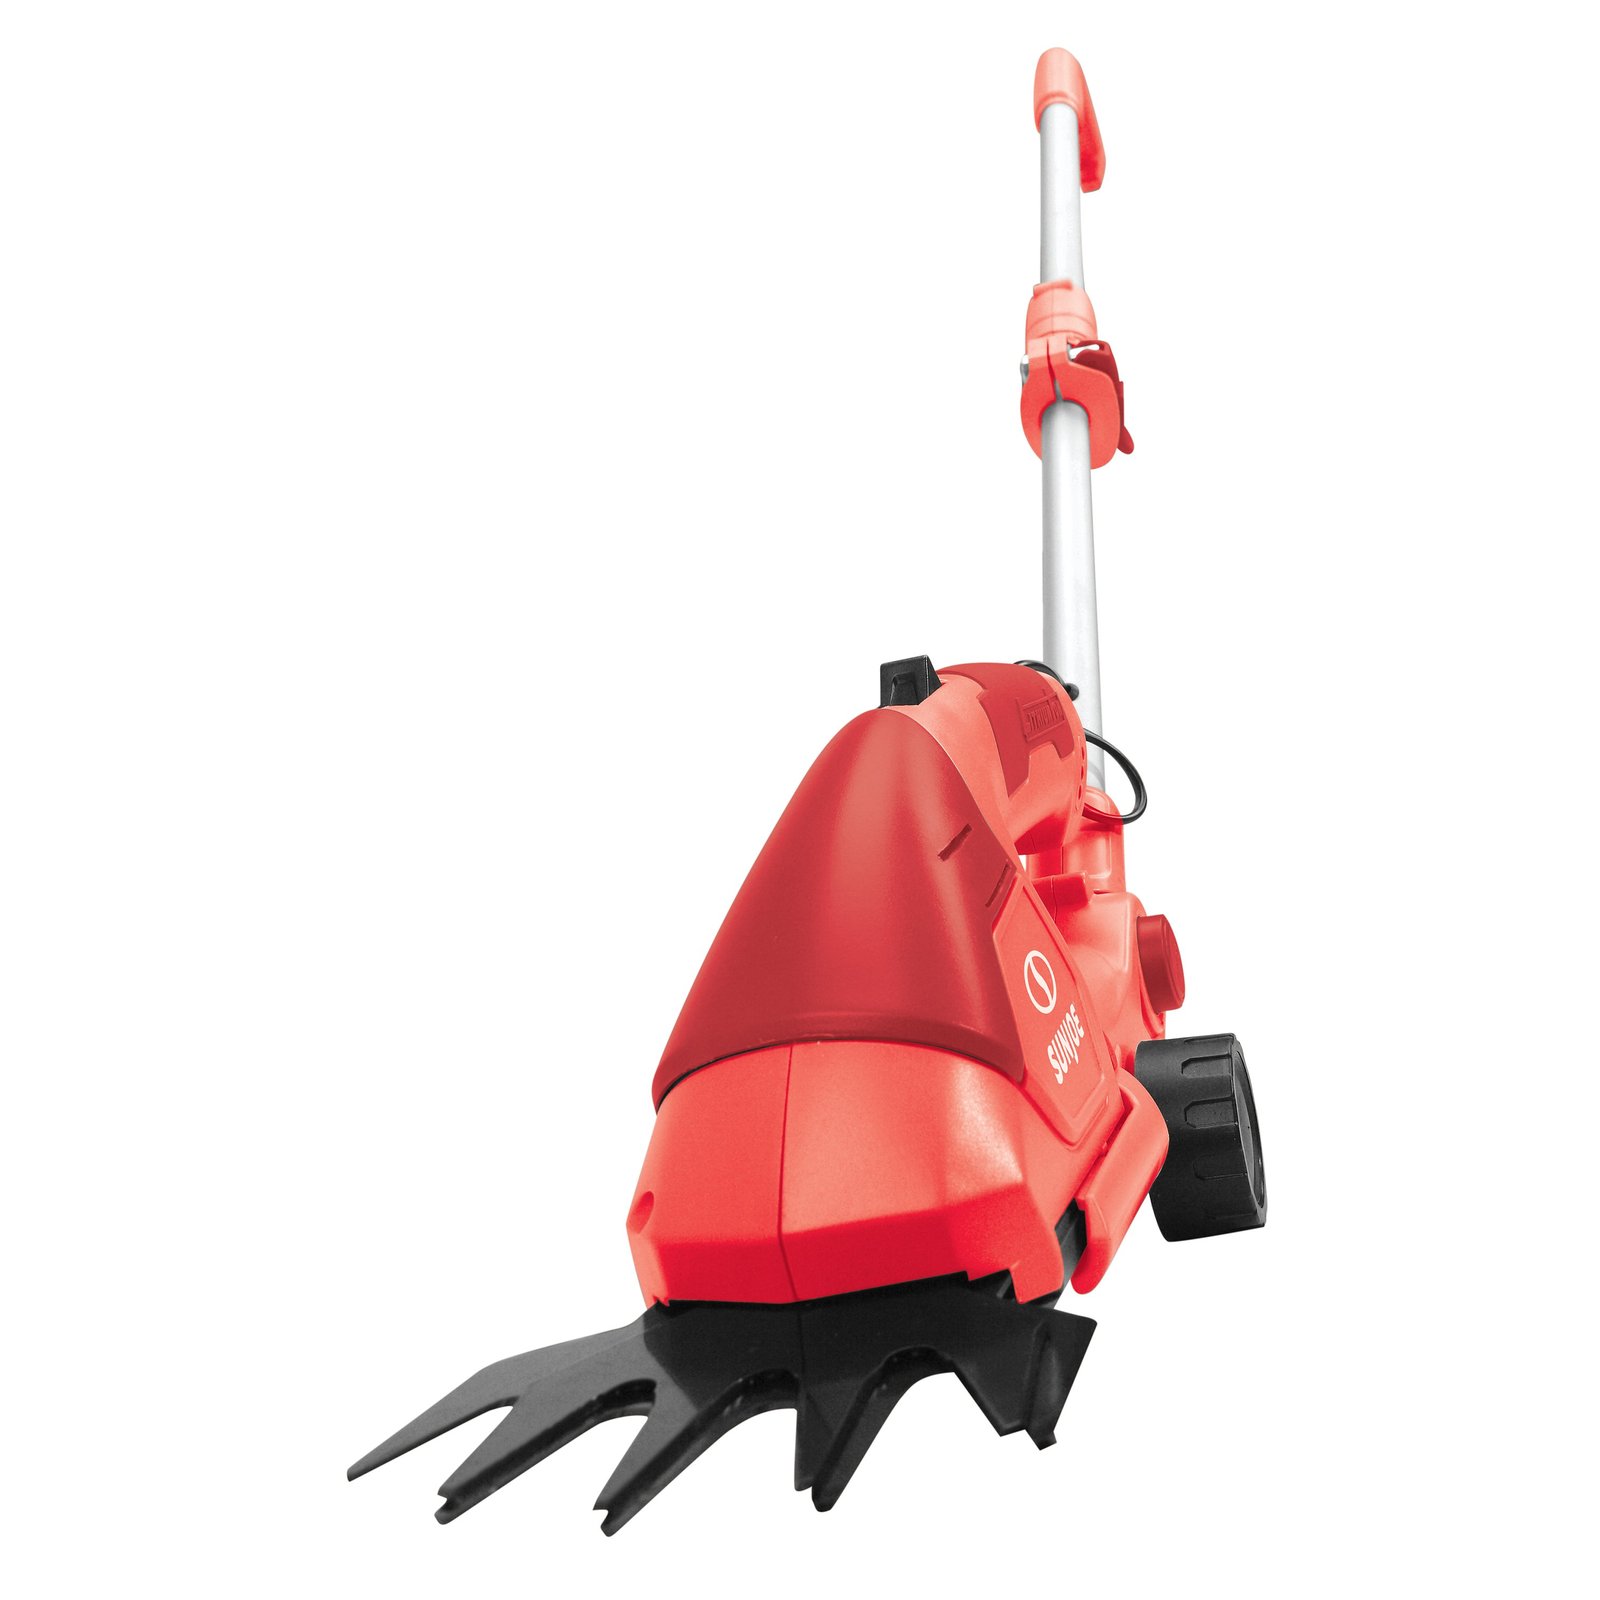 Sun Joe 2-in-1 Cordless Telescoping Grass Trimmer, 7.2 Volt (Red) - image 4 of 5